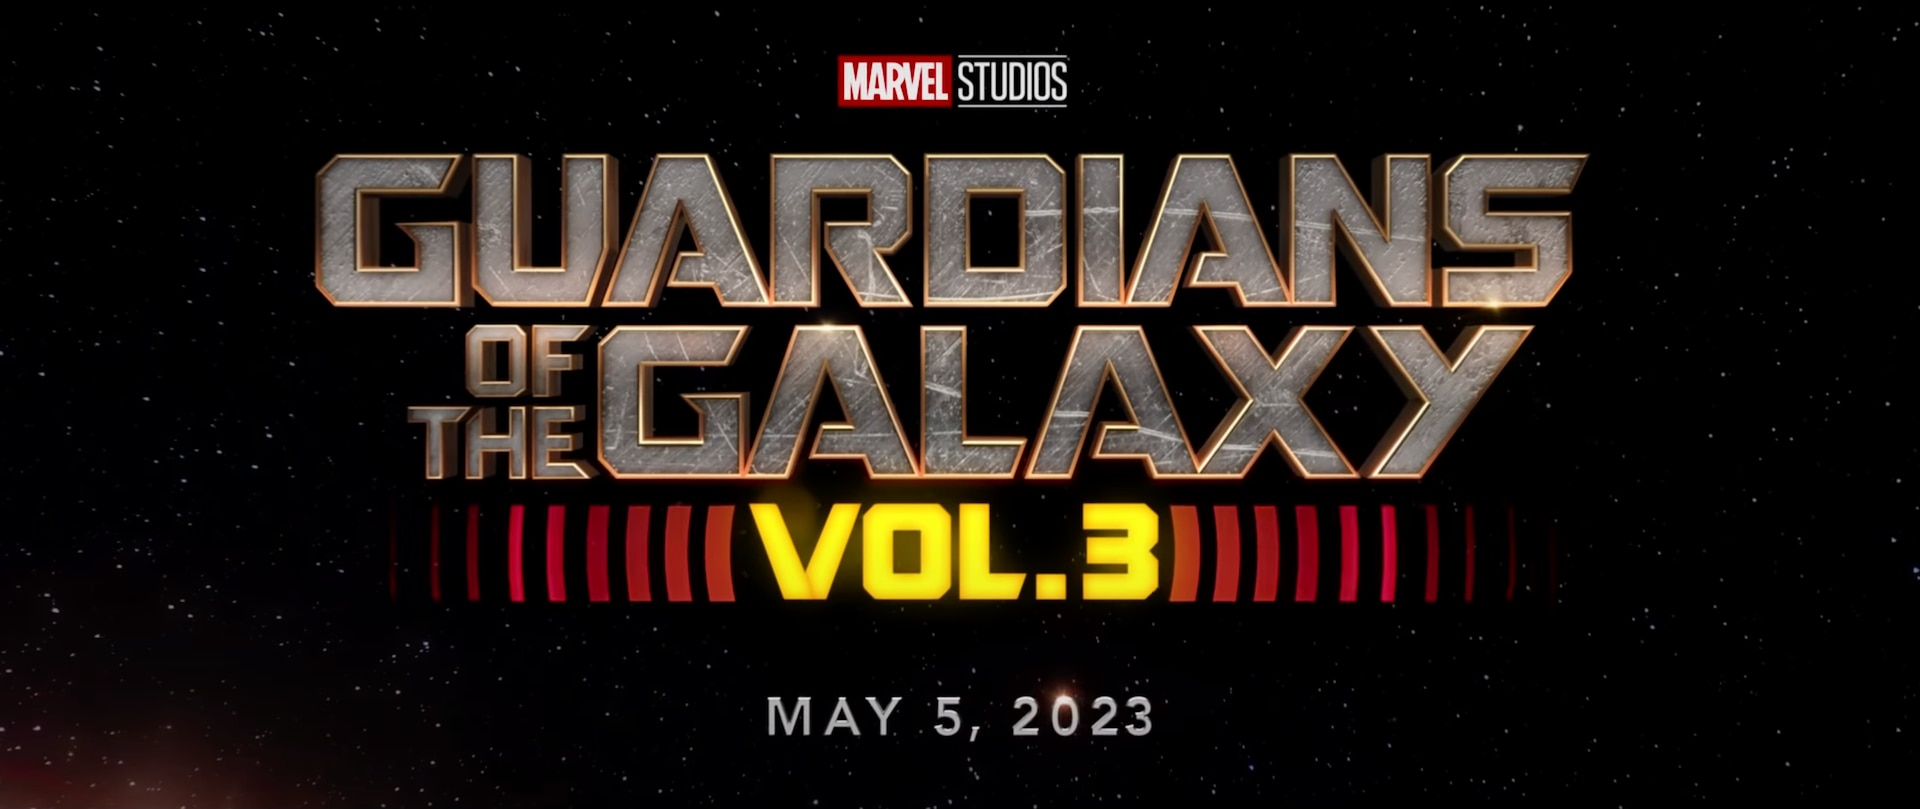 Guardians of the Galaxy 3 Logo YT